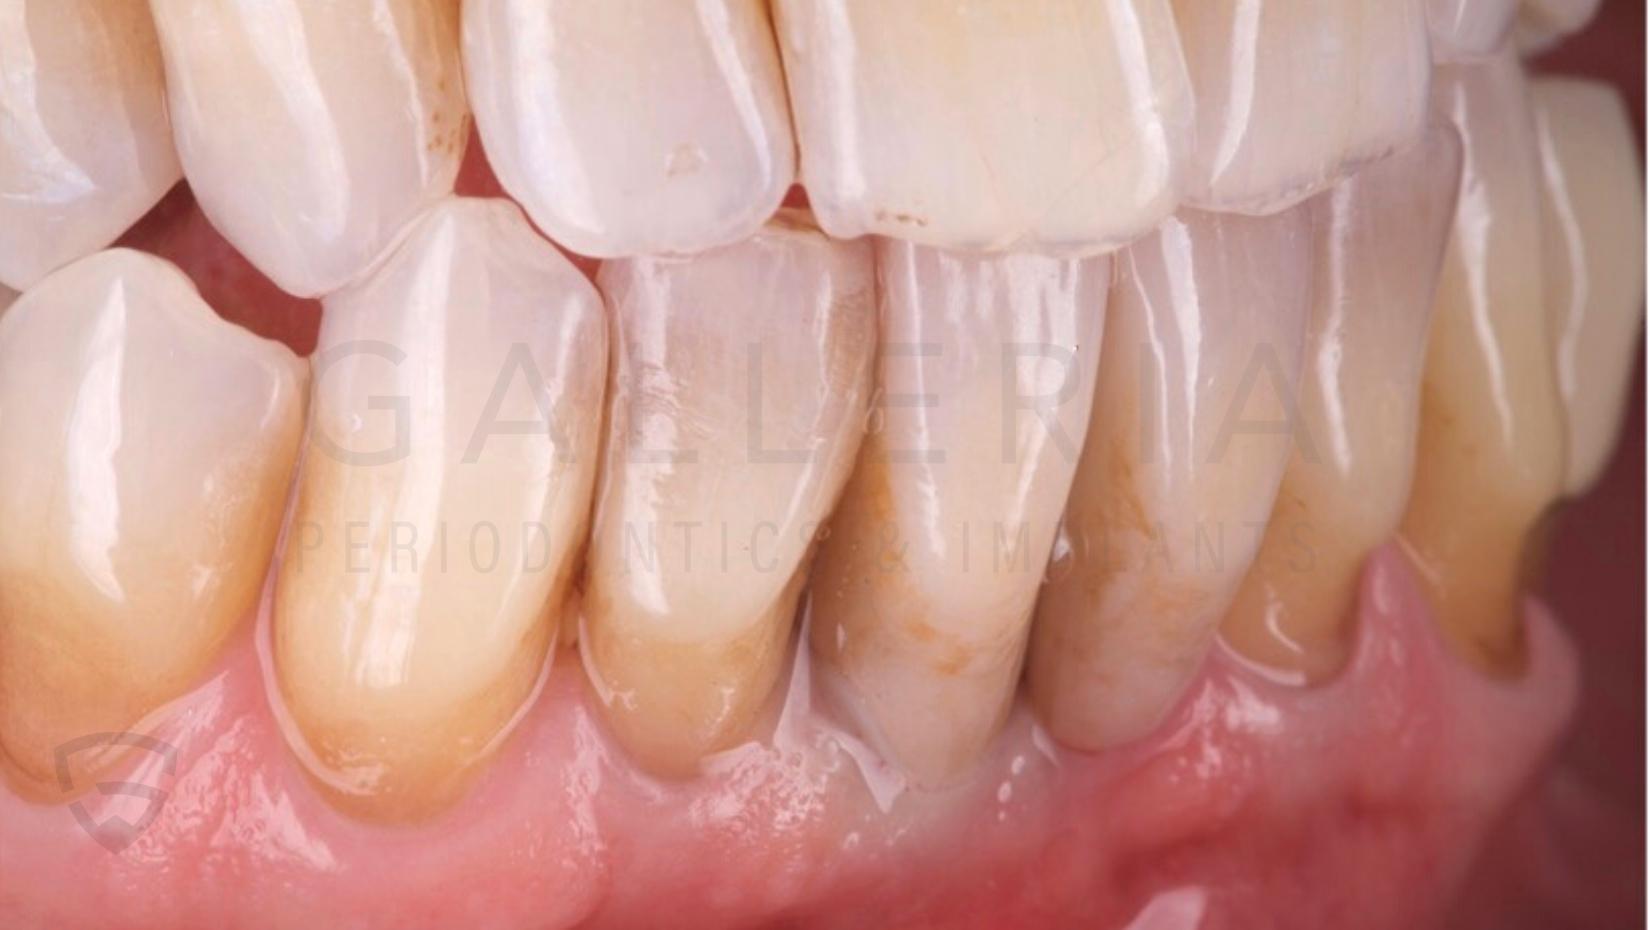 complete teeth results after dental implant